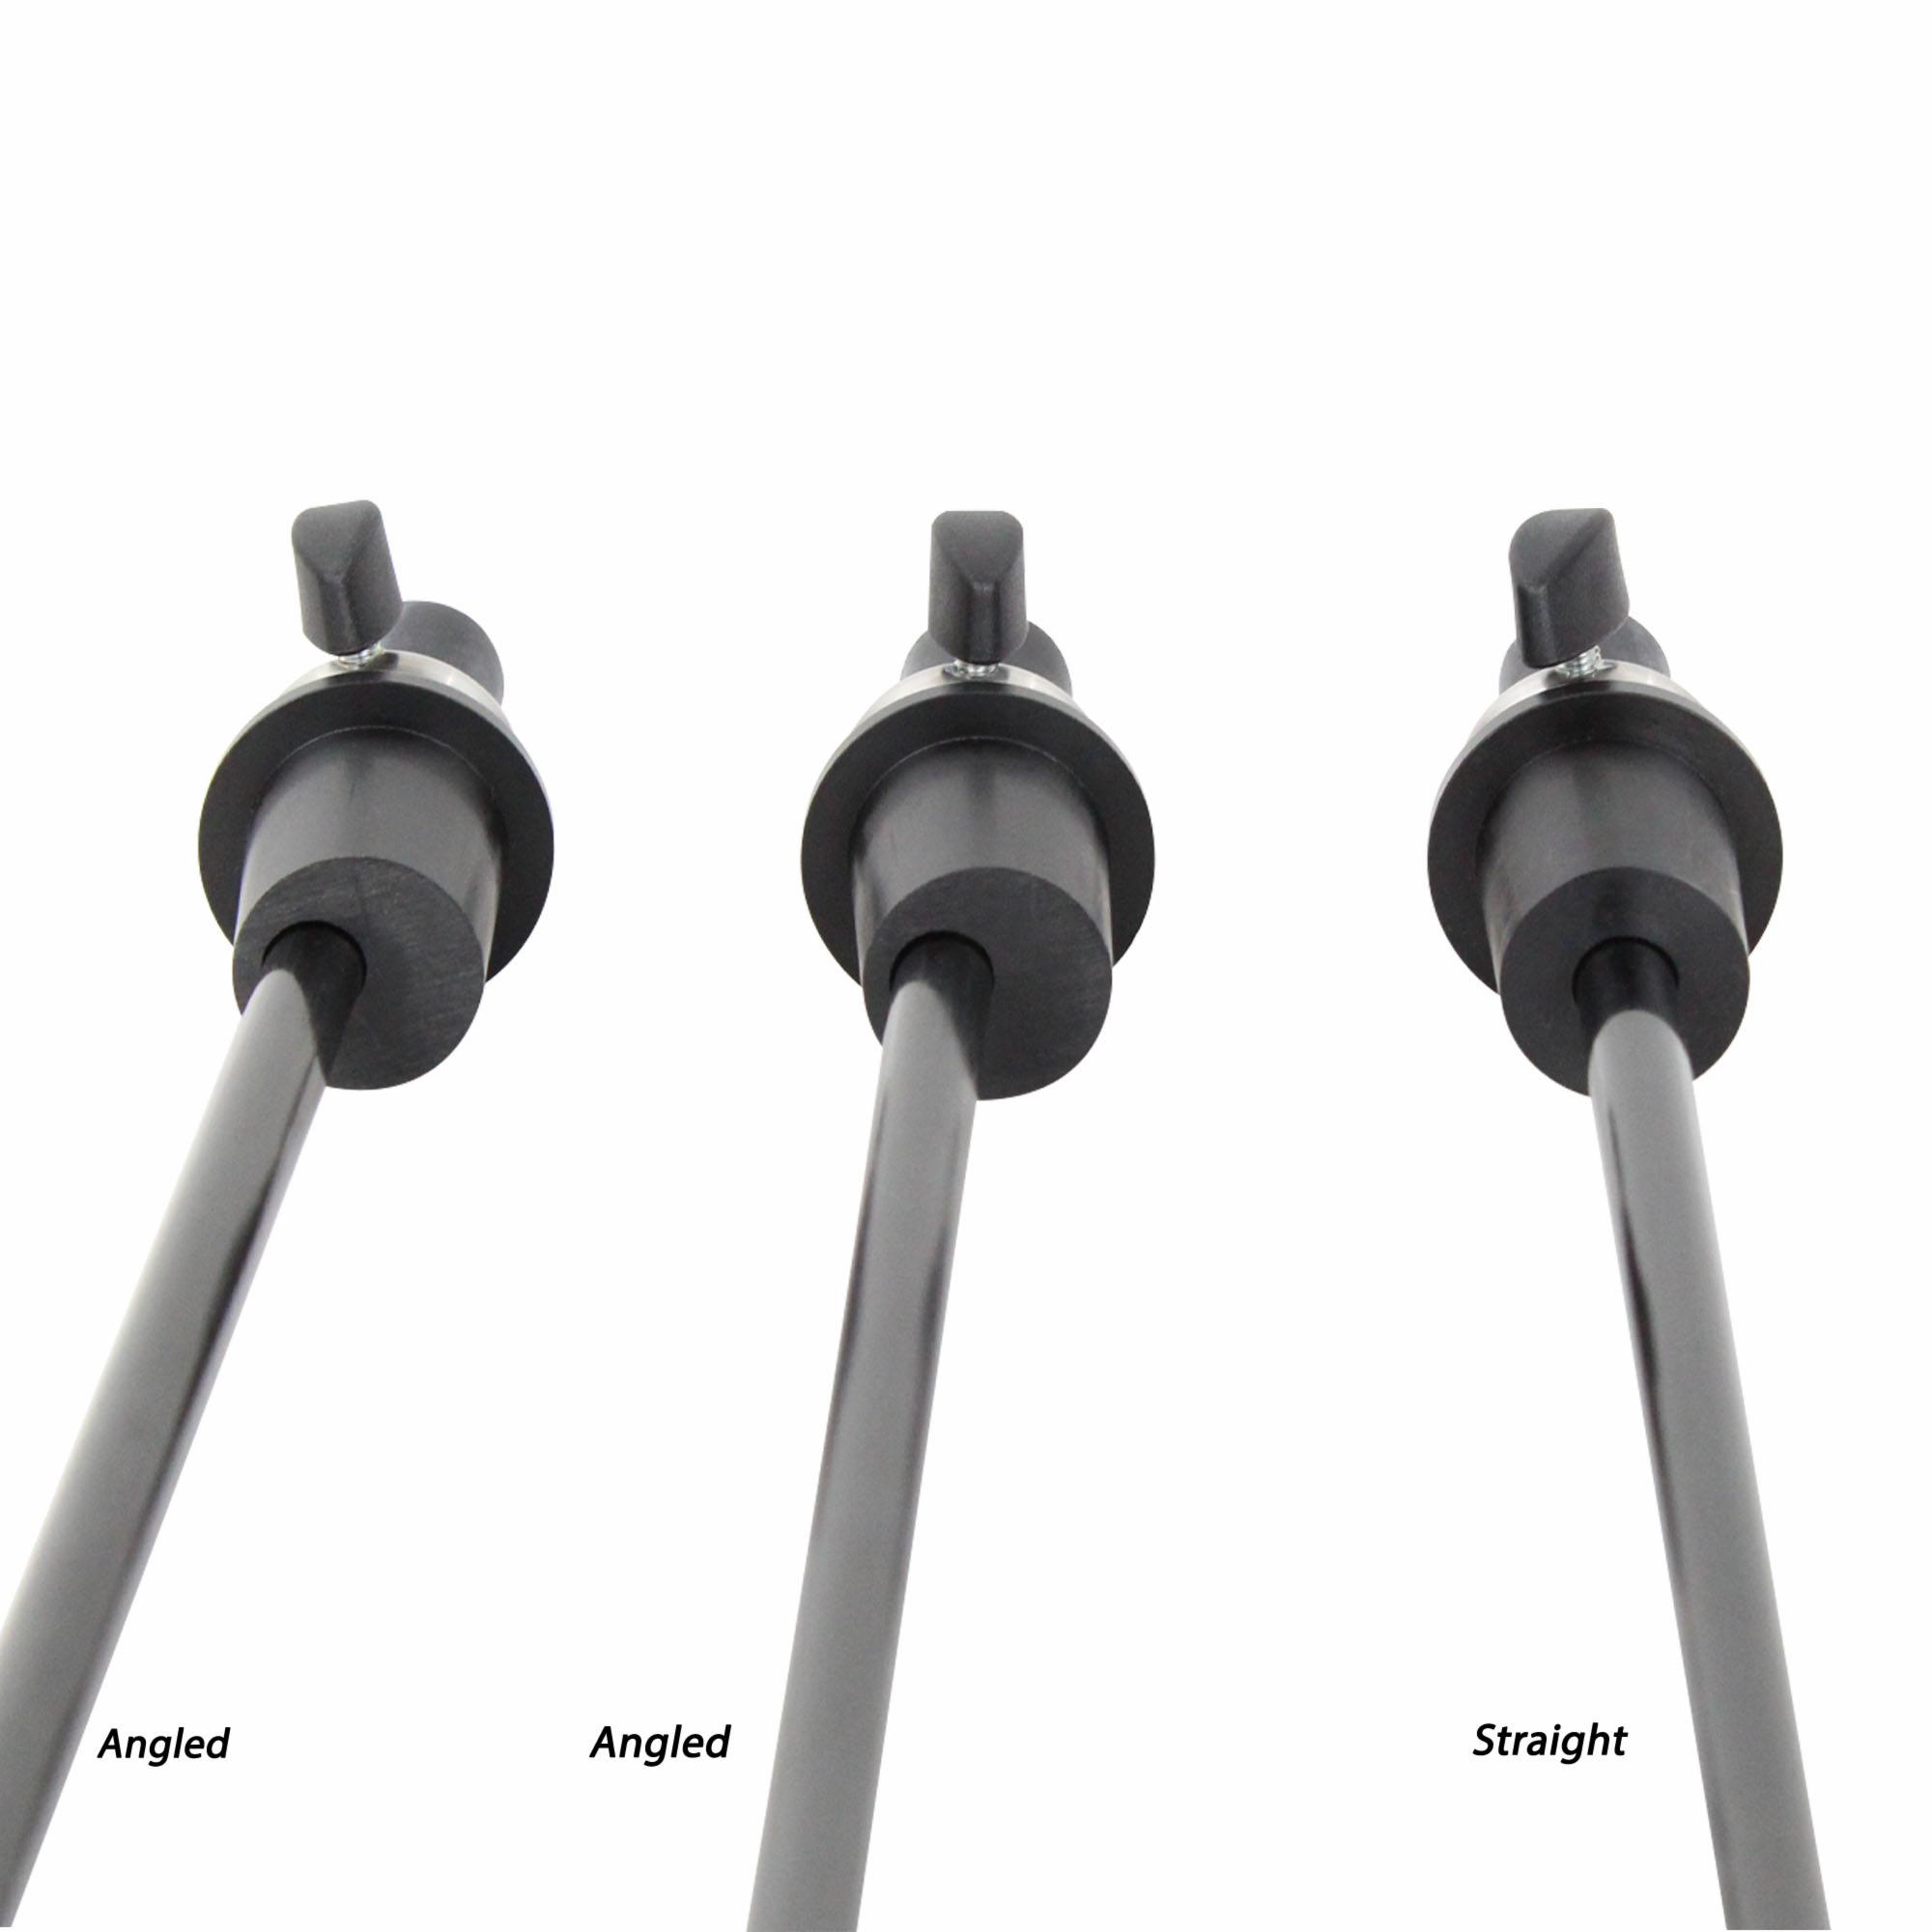 Endpins with angled or straight plug